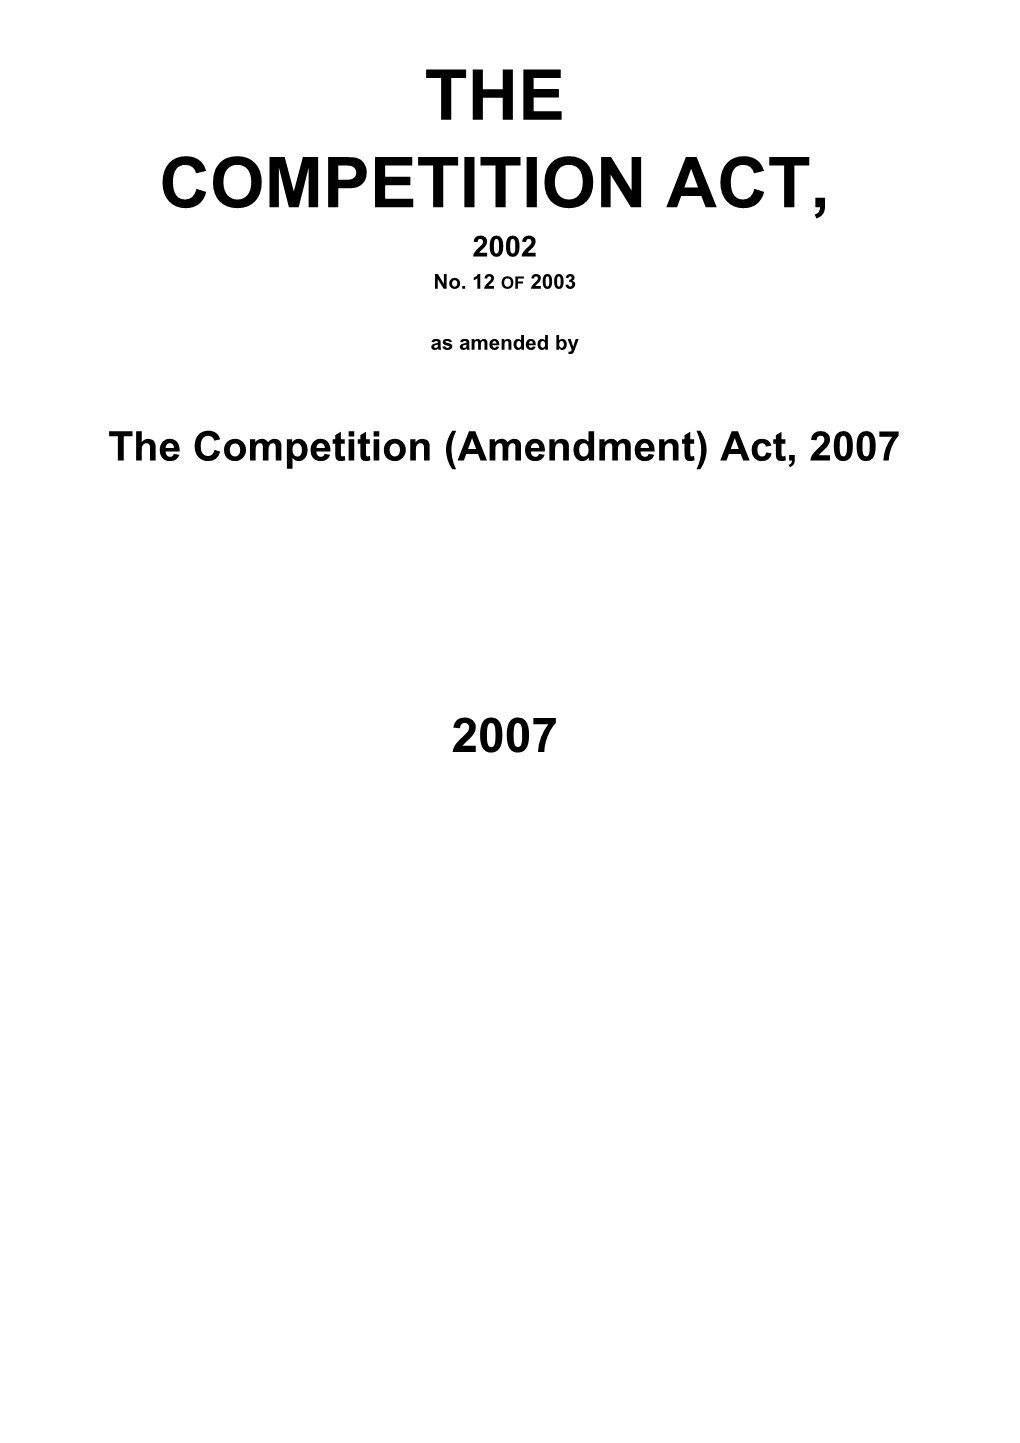 The Competition (Amendment) Act, 2007